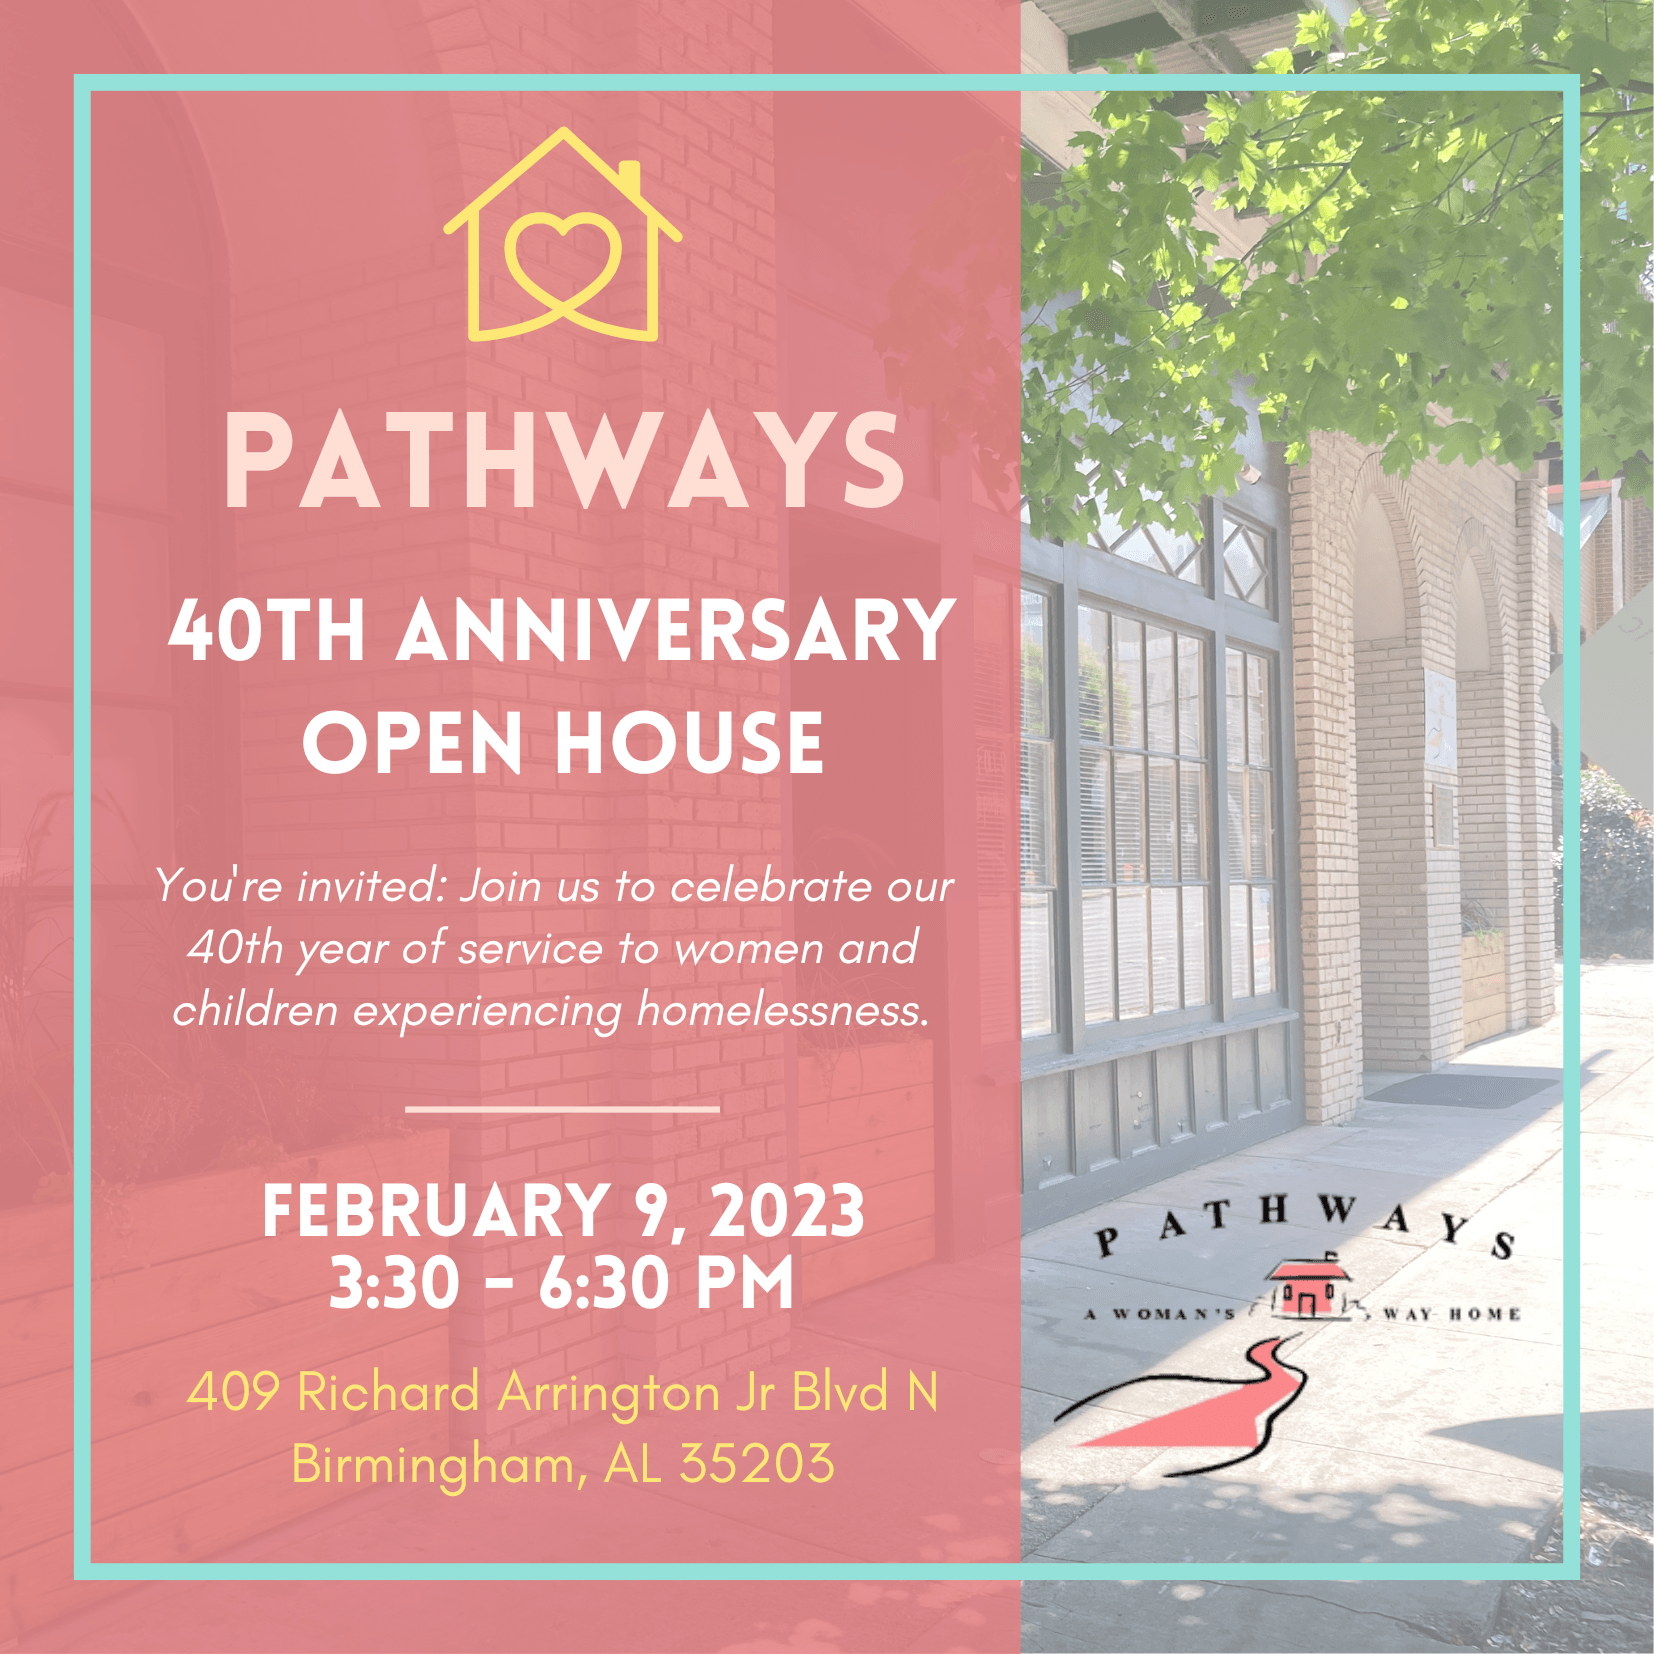 You're Invited: Pathways 40th Anniversary Open House